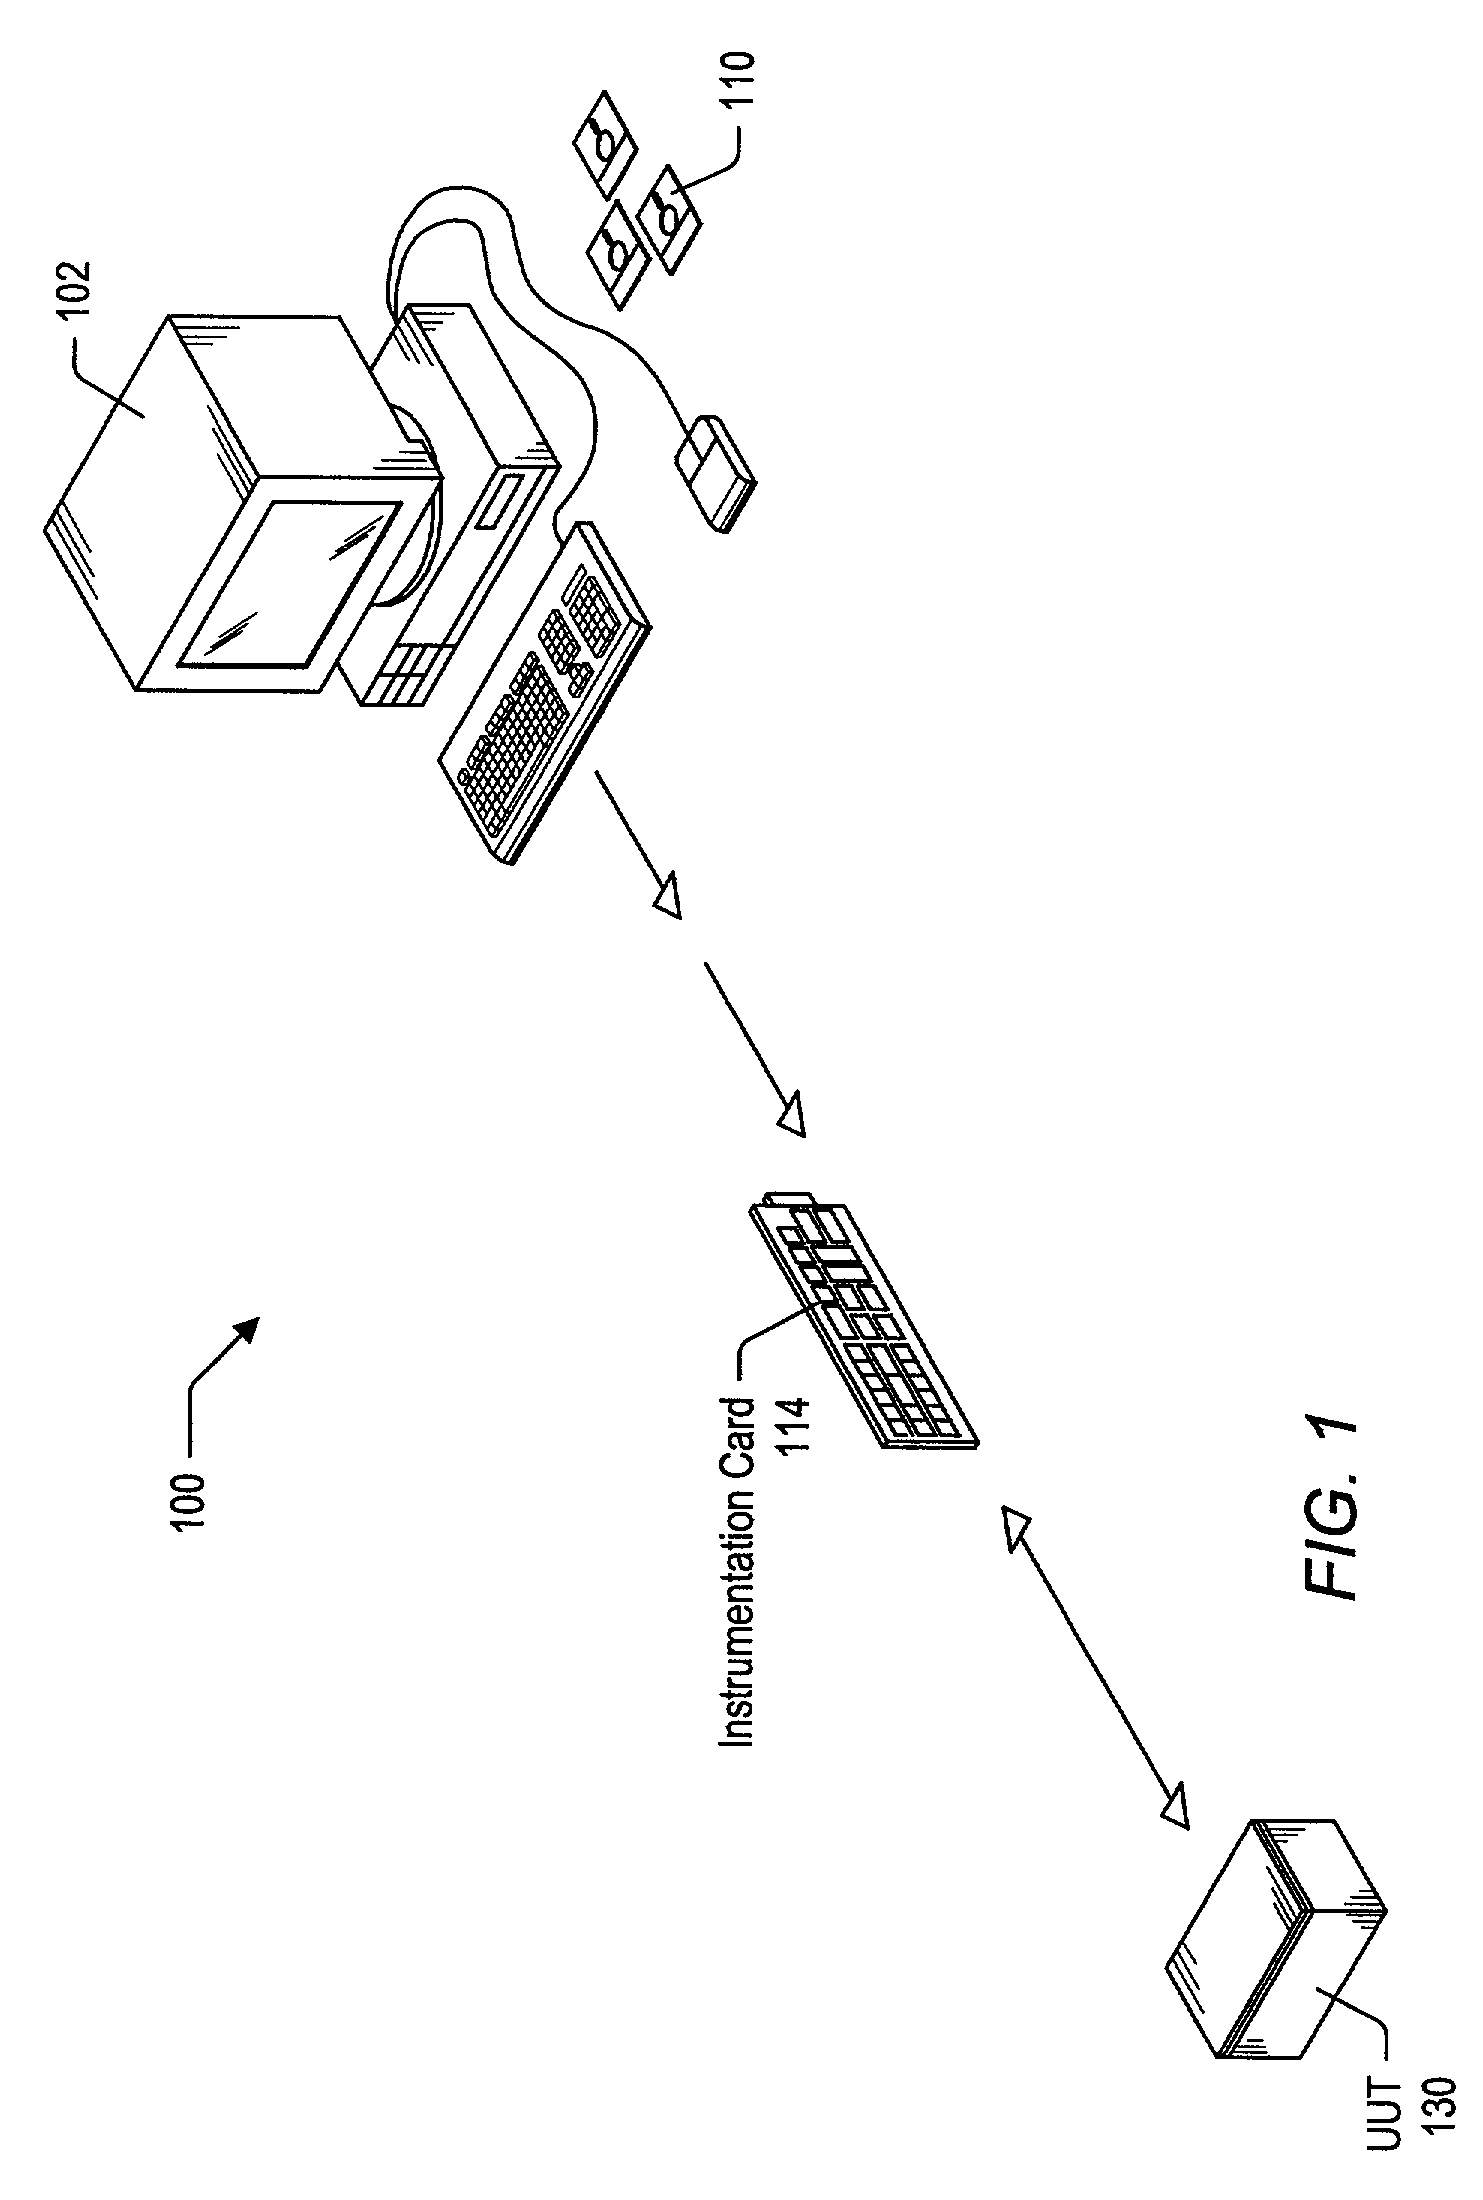 Instrumentation system having a reconfigurable instrumentation card with programmable logic and a modular daughter card